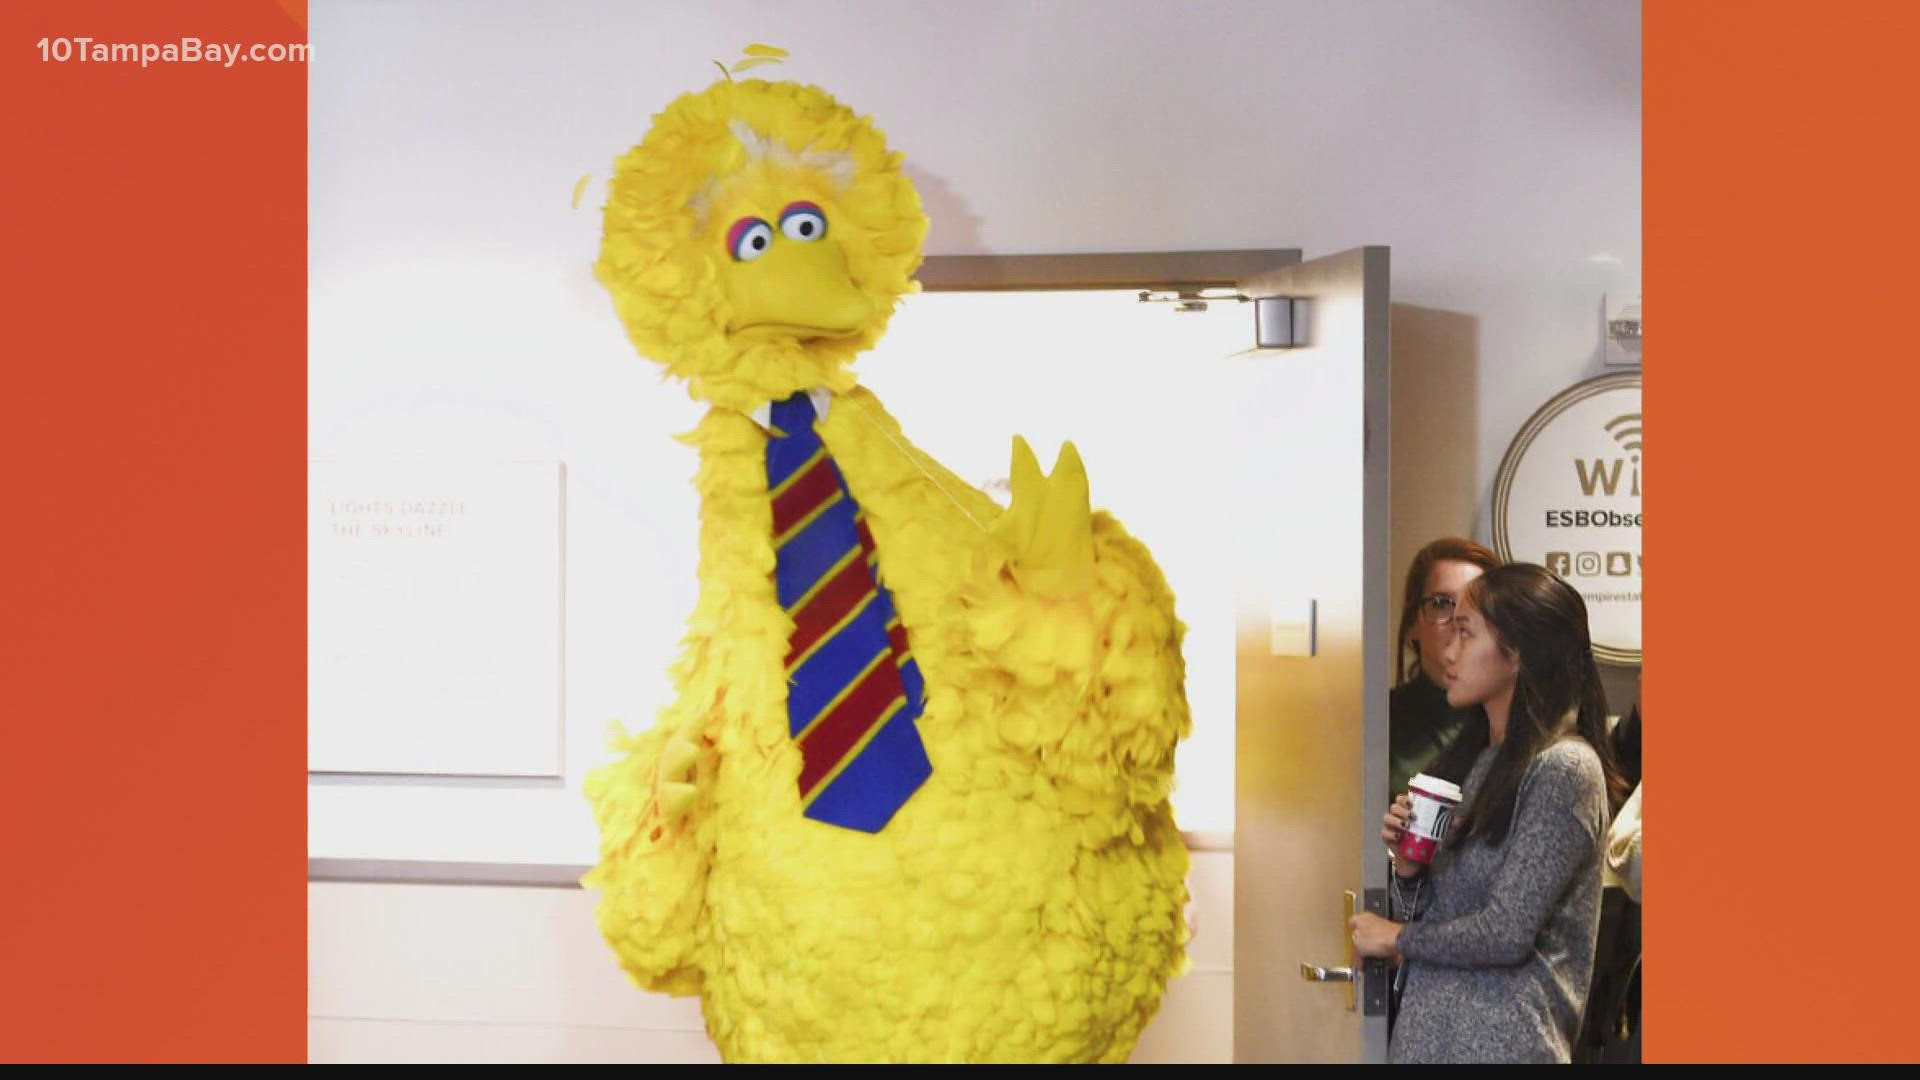 The Pfizer vaccine was approved for children 5-11 earlier this week. Big Bird, Elmo and more Muppets are encouraging them to get vaccinated.